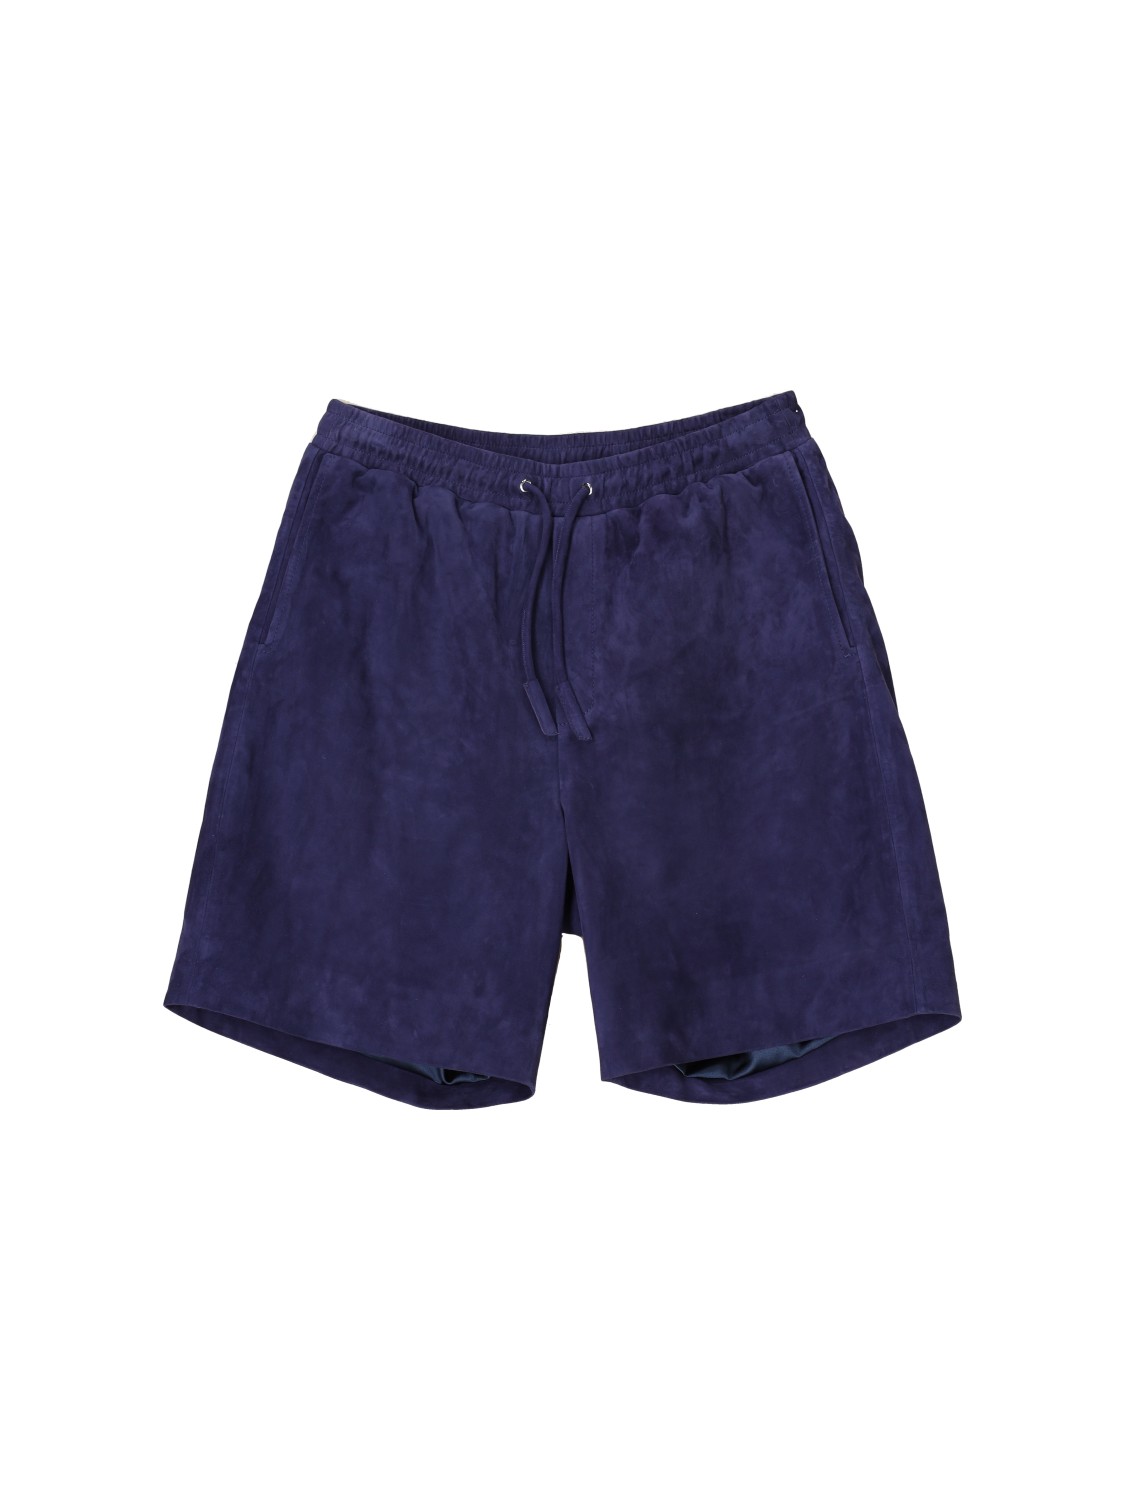 Pacific - Suede shorts  